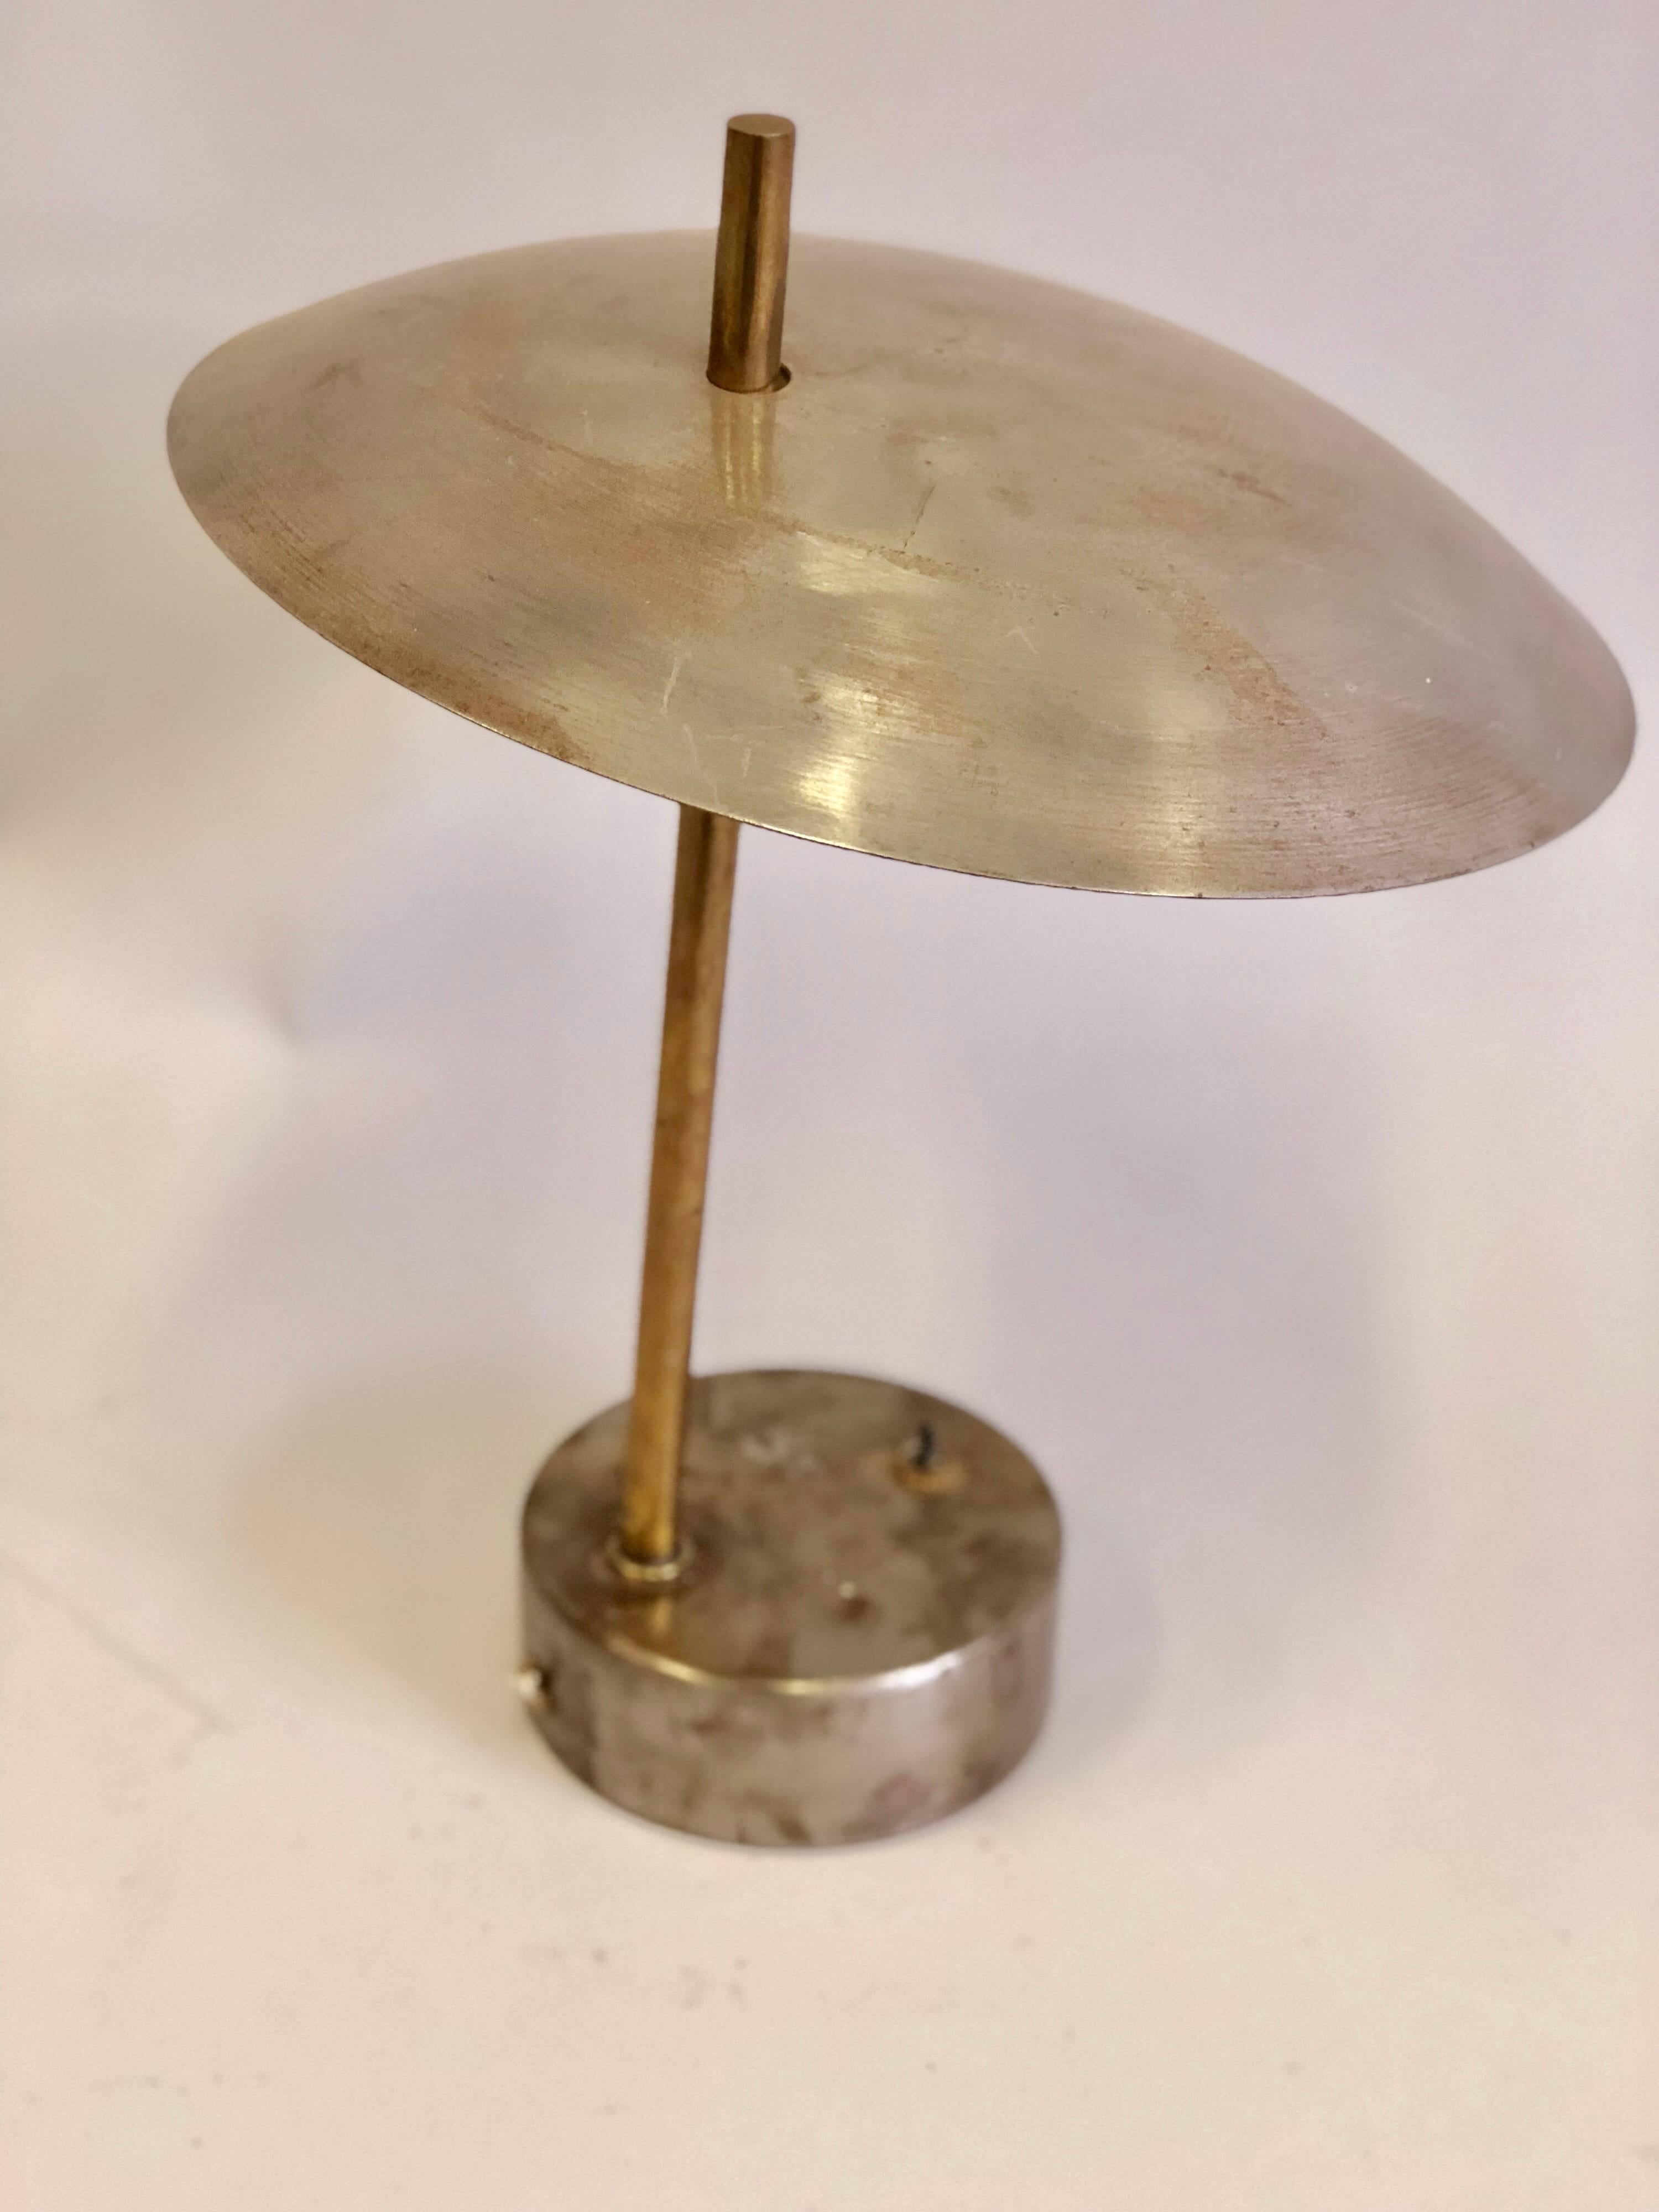 Pair of French Mid-Century Modern industrial steel and brass desk or table lamps.